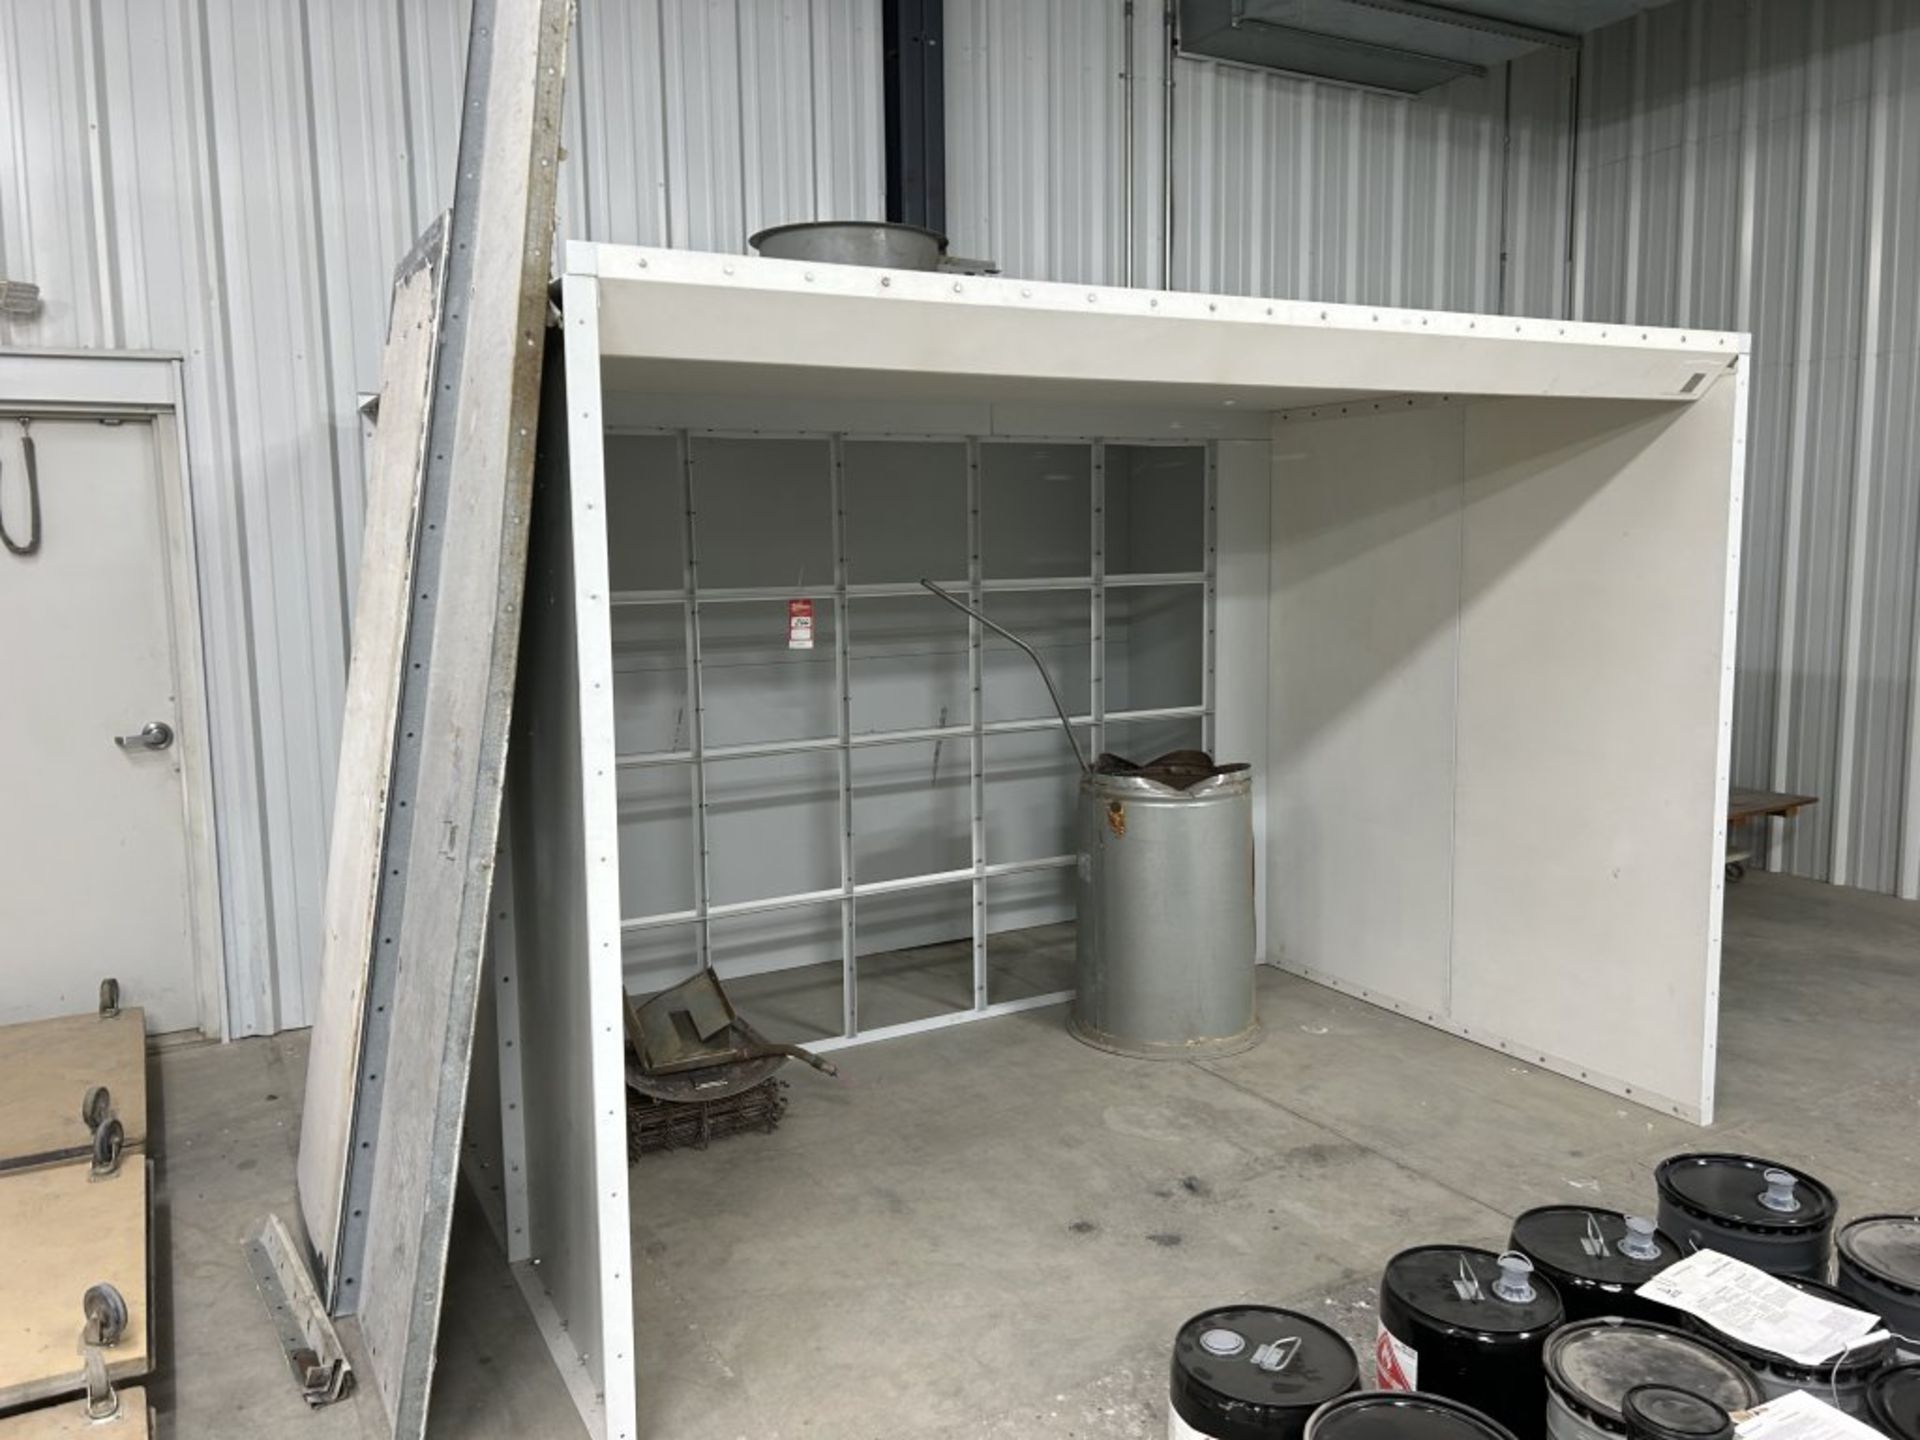 PAINT BOOTH, 10' X 9' X 86'', BUYER IS RESPONSIBLE FOR PROPER REMOVAL